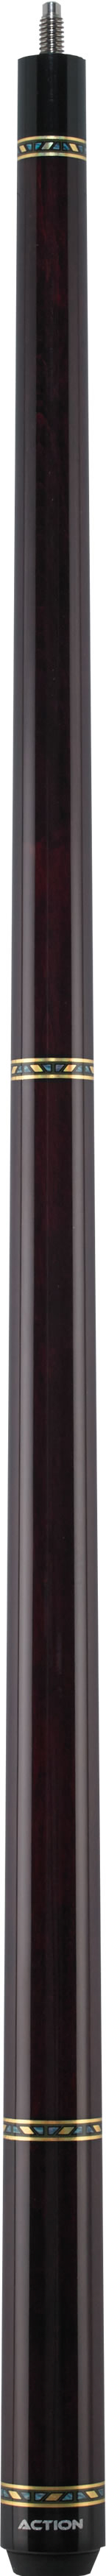 Action VAL24 Value Pool Cue Pool Cue